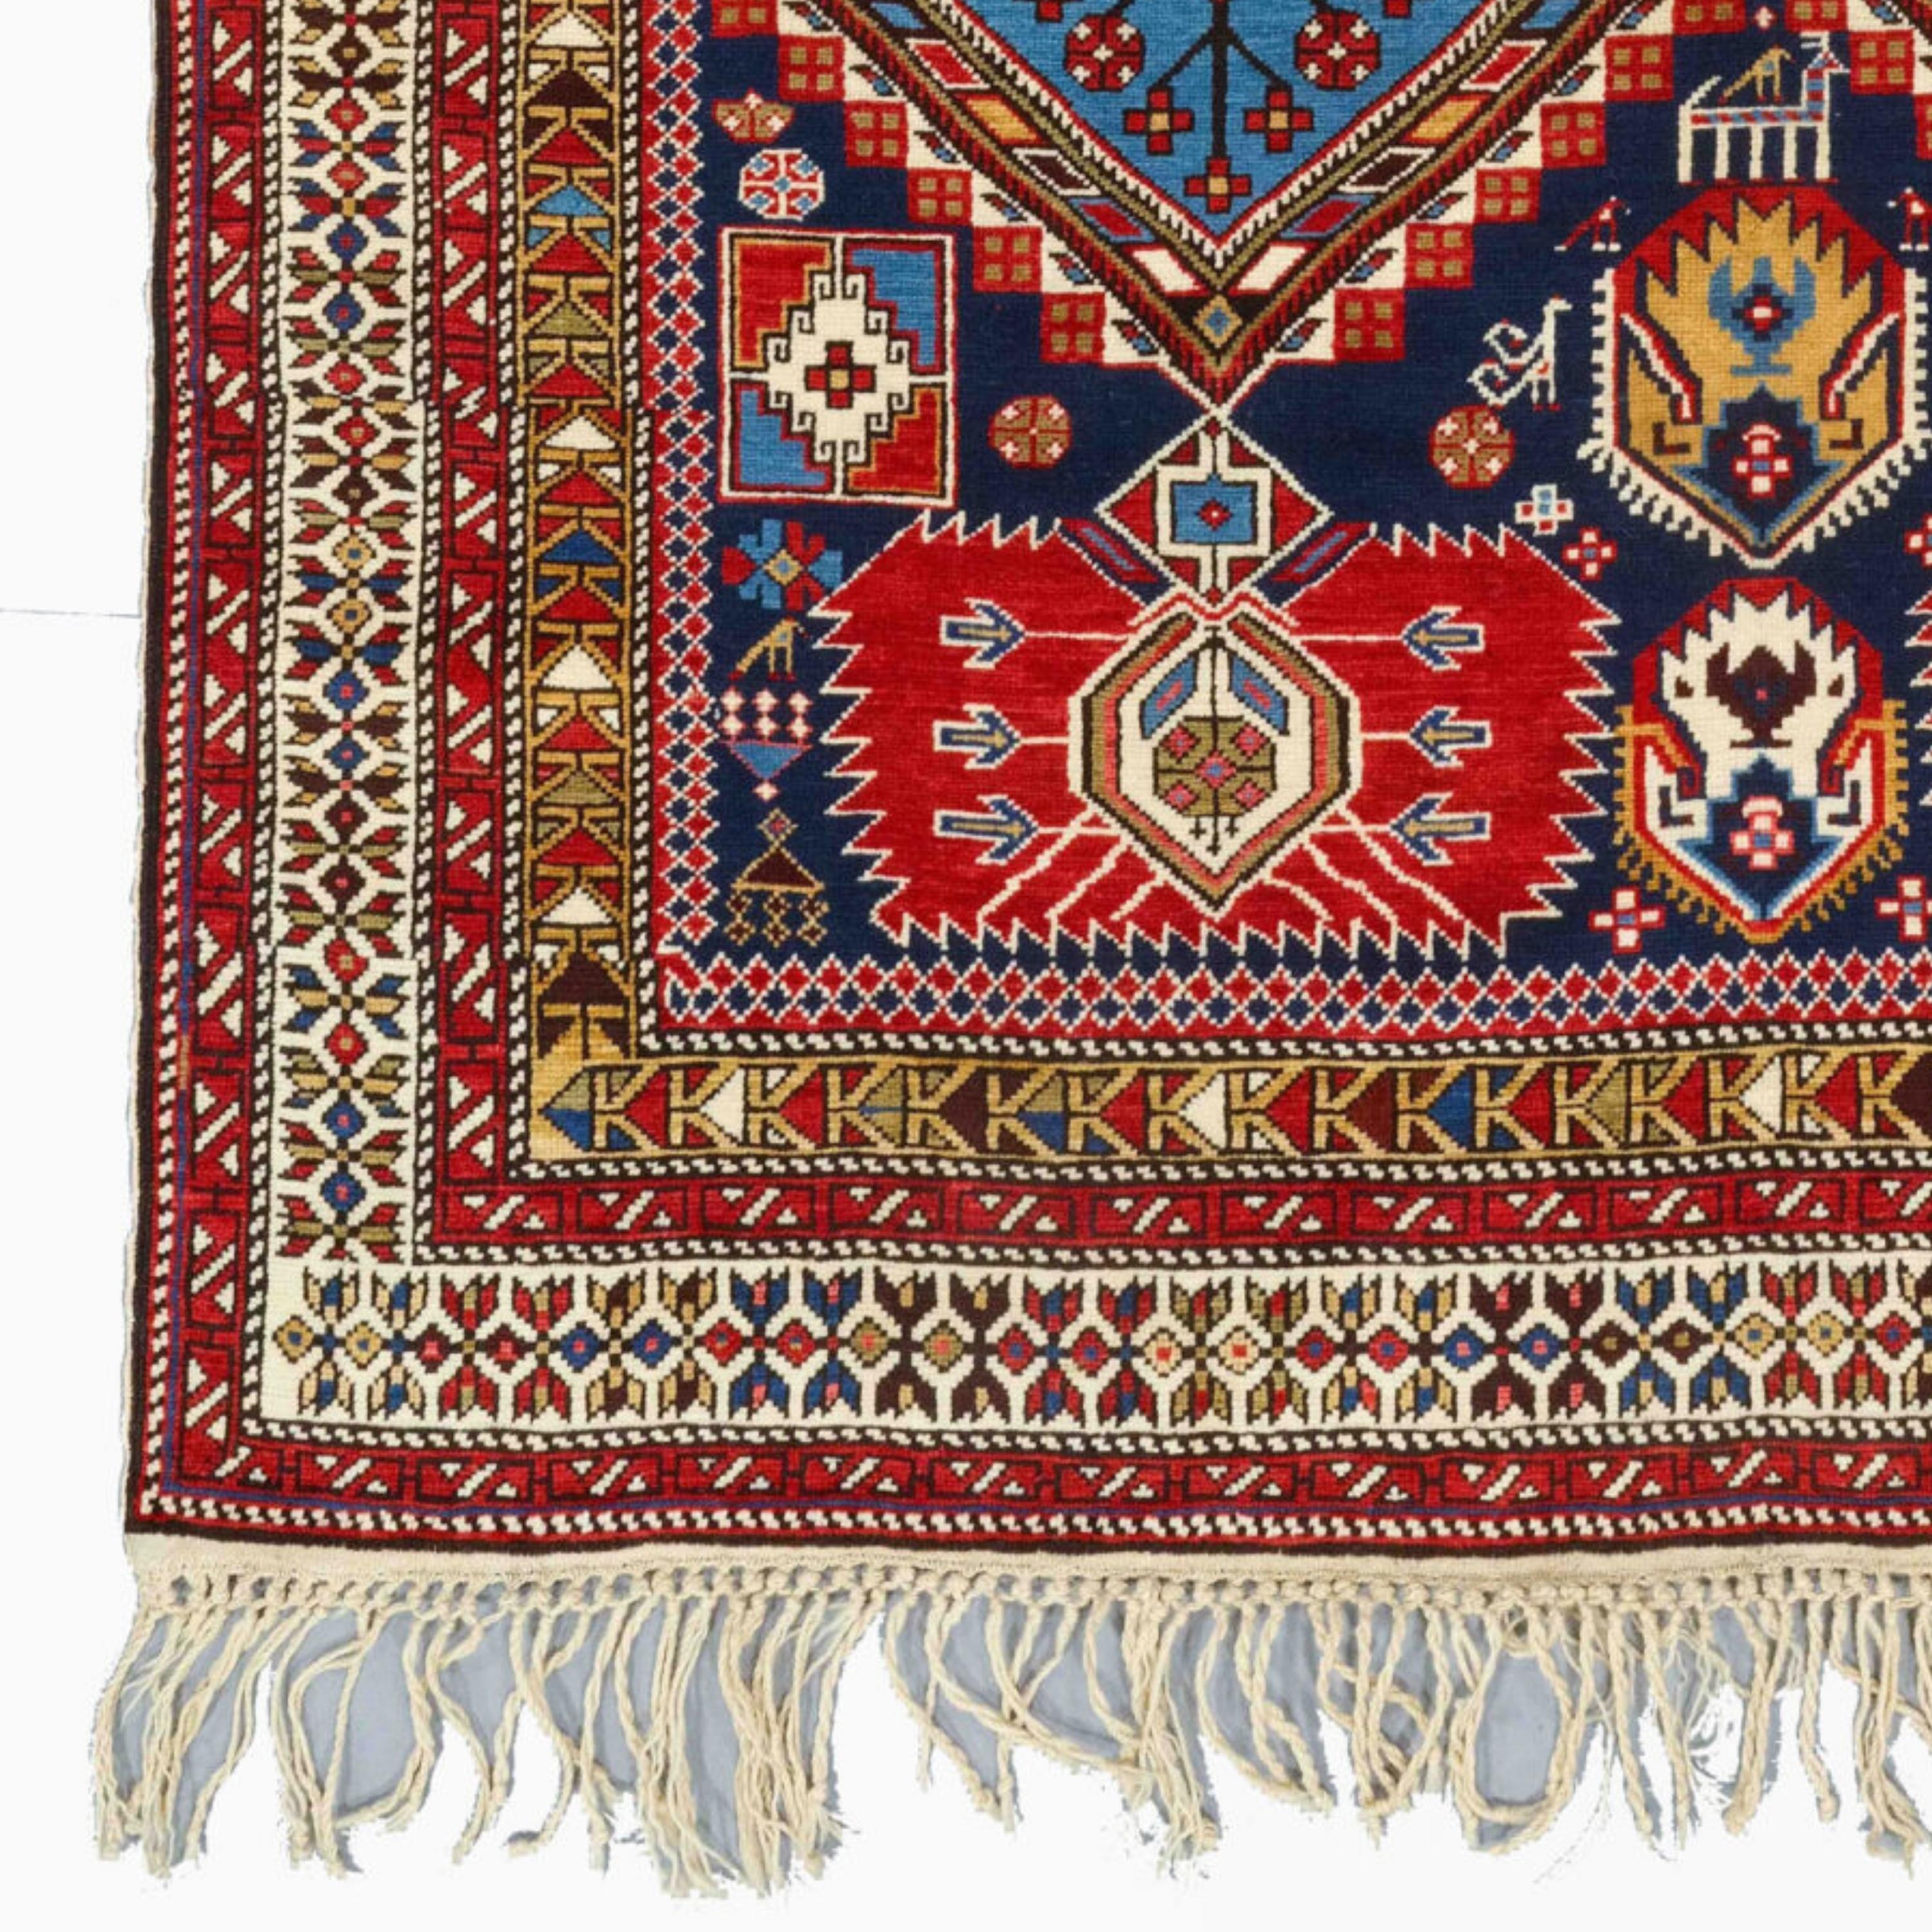 Antique Caucasian stagezar carpet is a type of carpet woven in the Caucasus region and has a pattern called scenezar, which means stage or theater. These carpets are usually made of wool material and woven with vibrant colors such as red, blue,